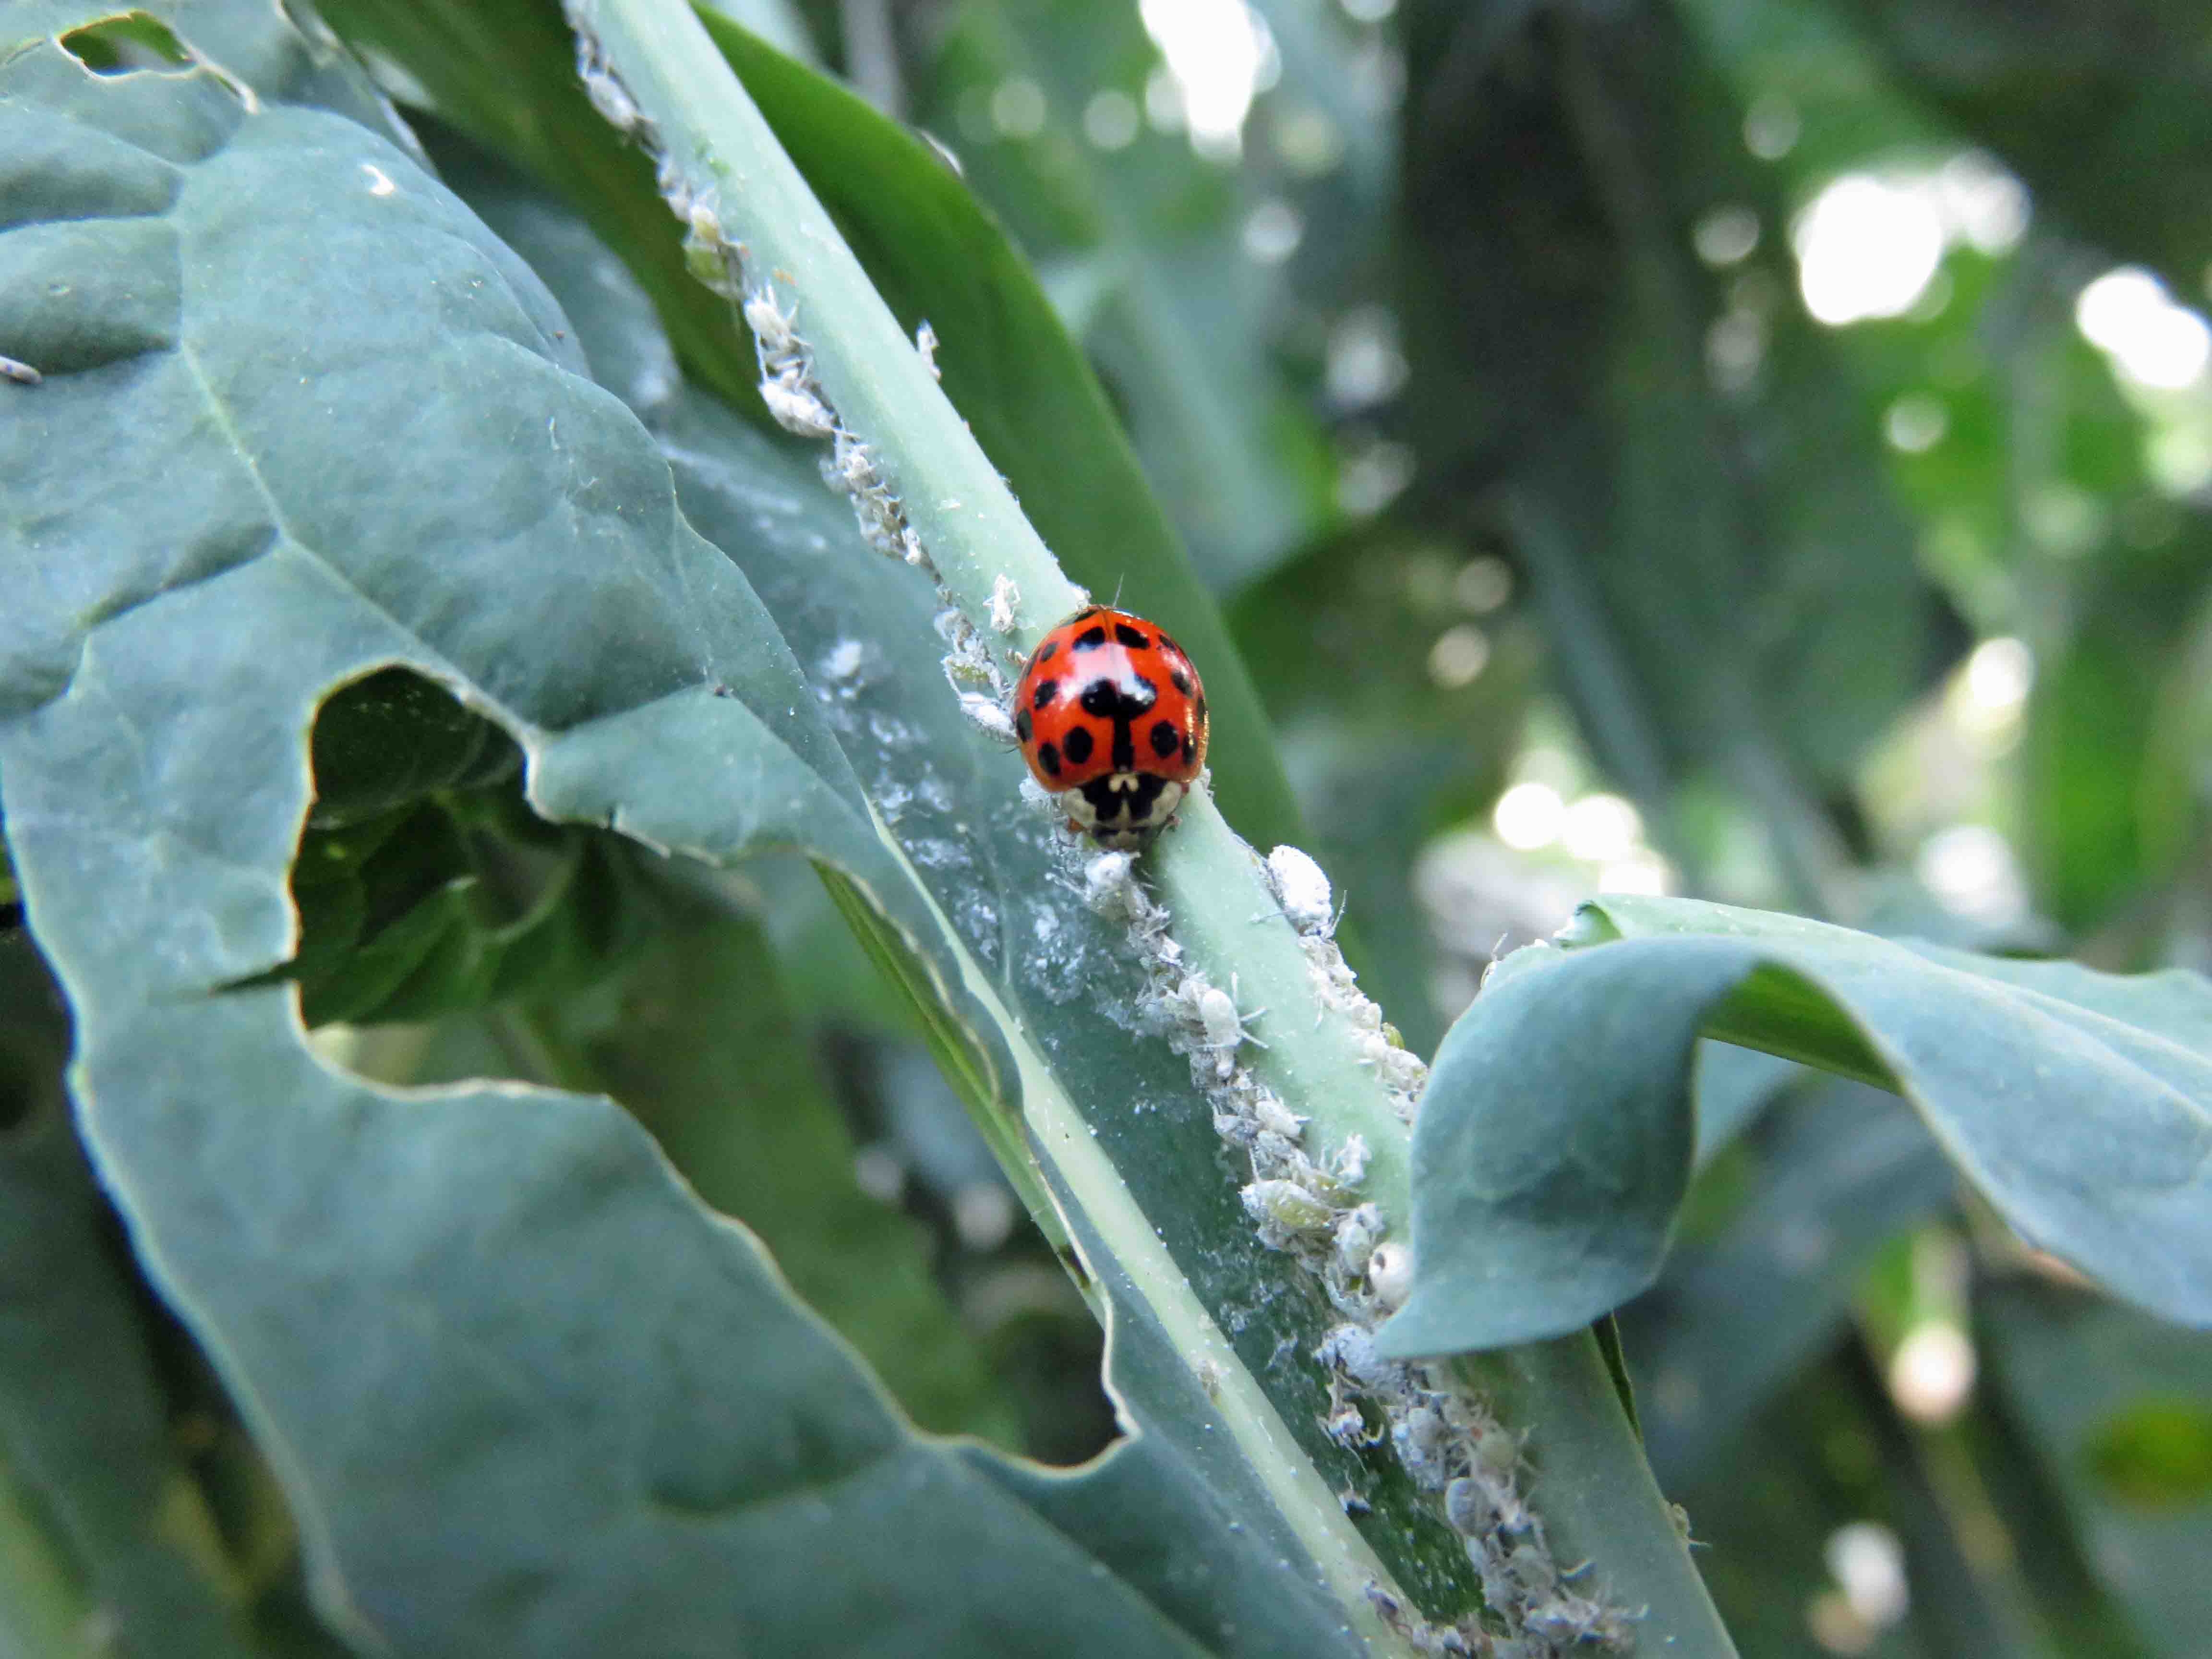 Ladybugs are Good for Your Garden - The Real Dirt Blog - ANR Blogs